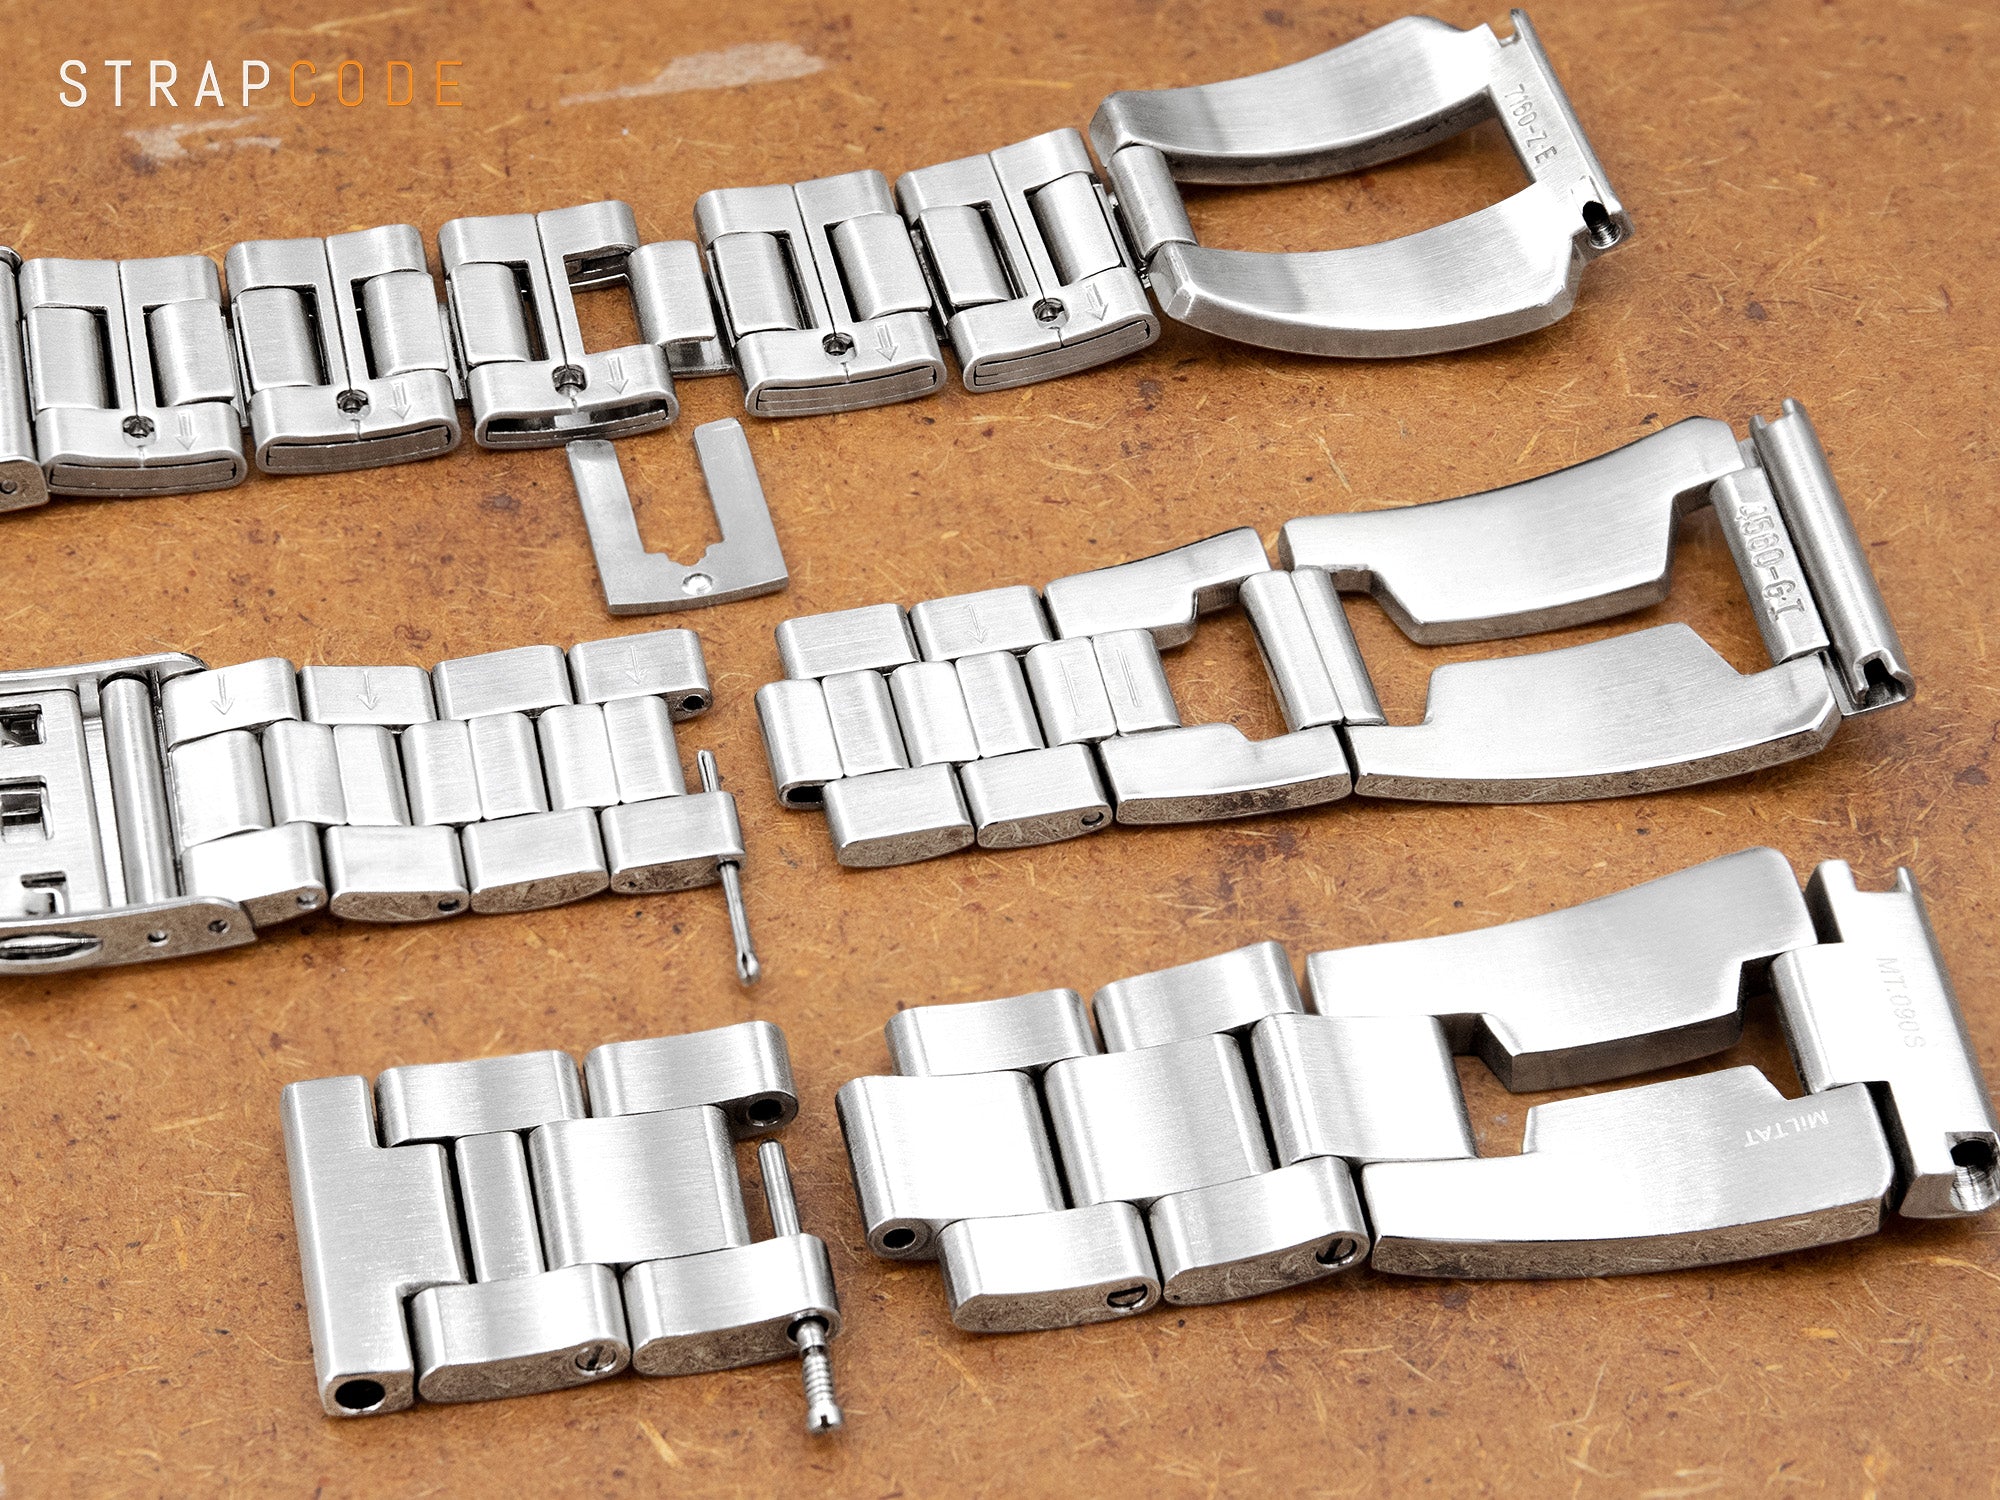 The assembled details of two vintage Seiko Razor bracelets and new screw adjustment details  by Strapcode 